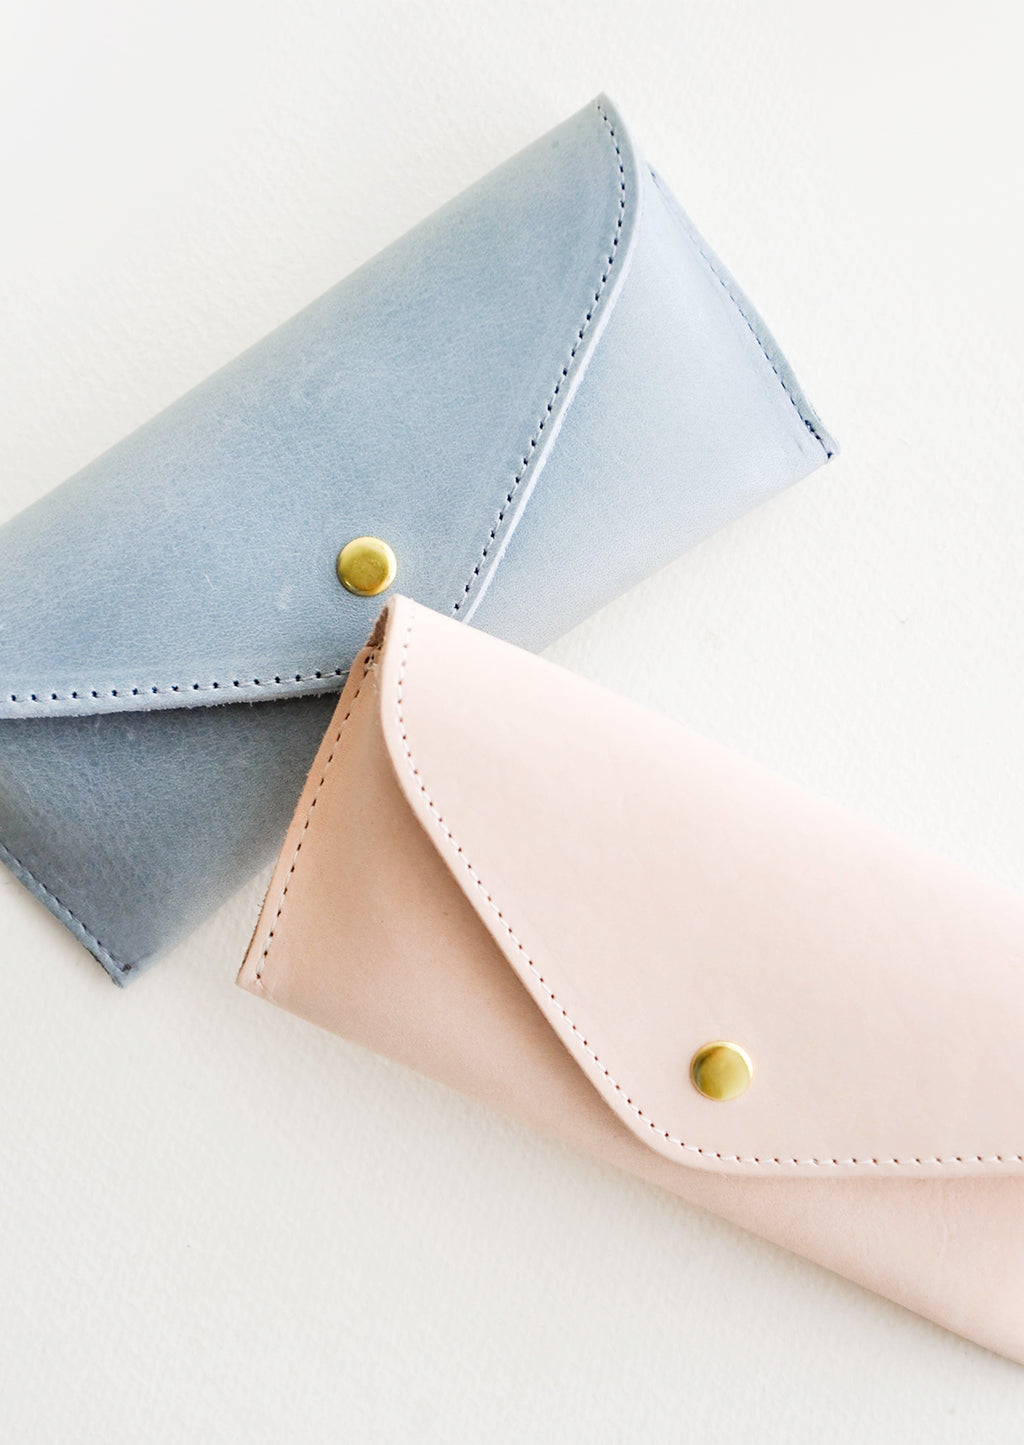 1: Two leather cases for sunglasses that fold close with a snap, one blue and one pink.